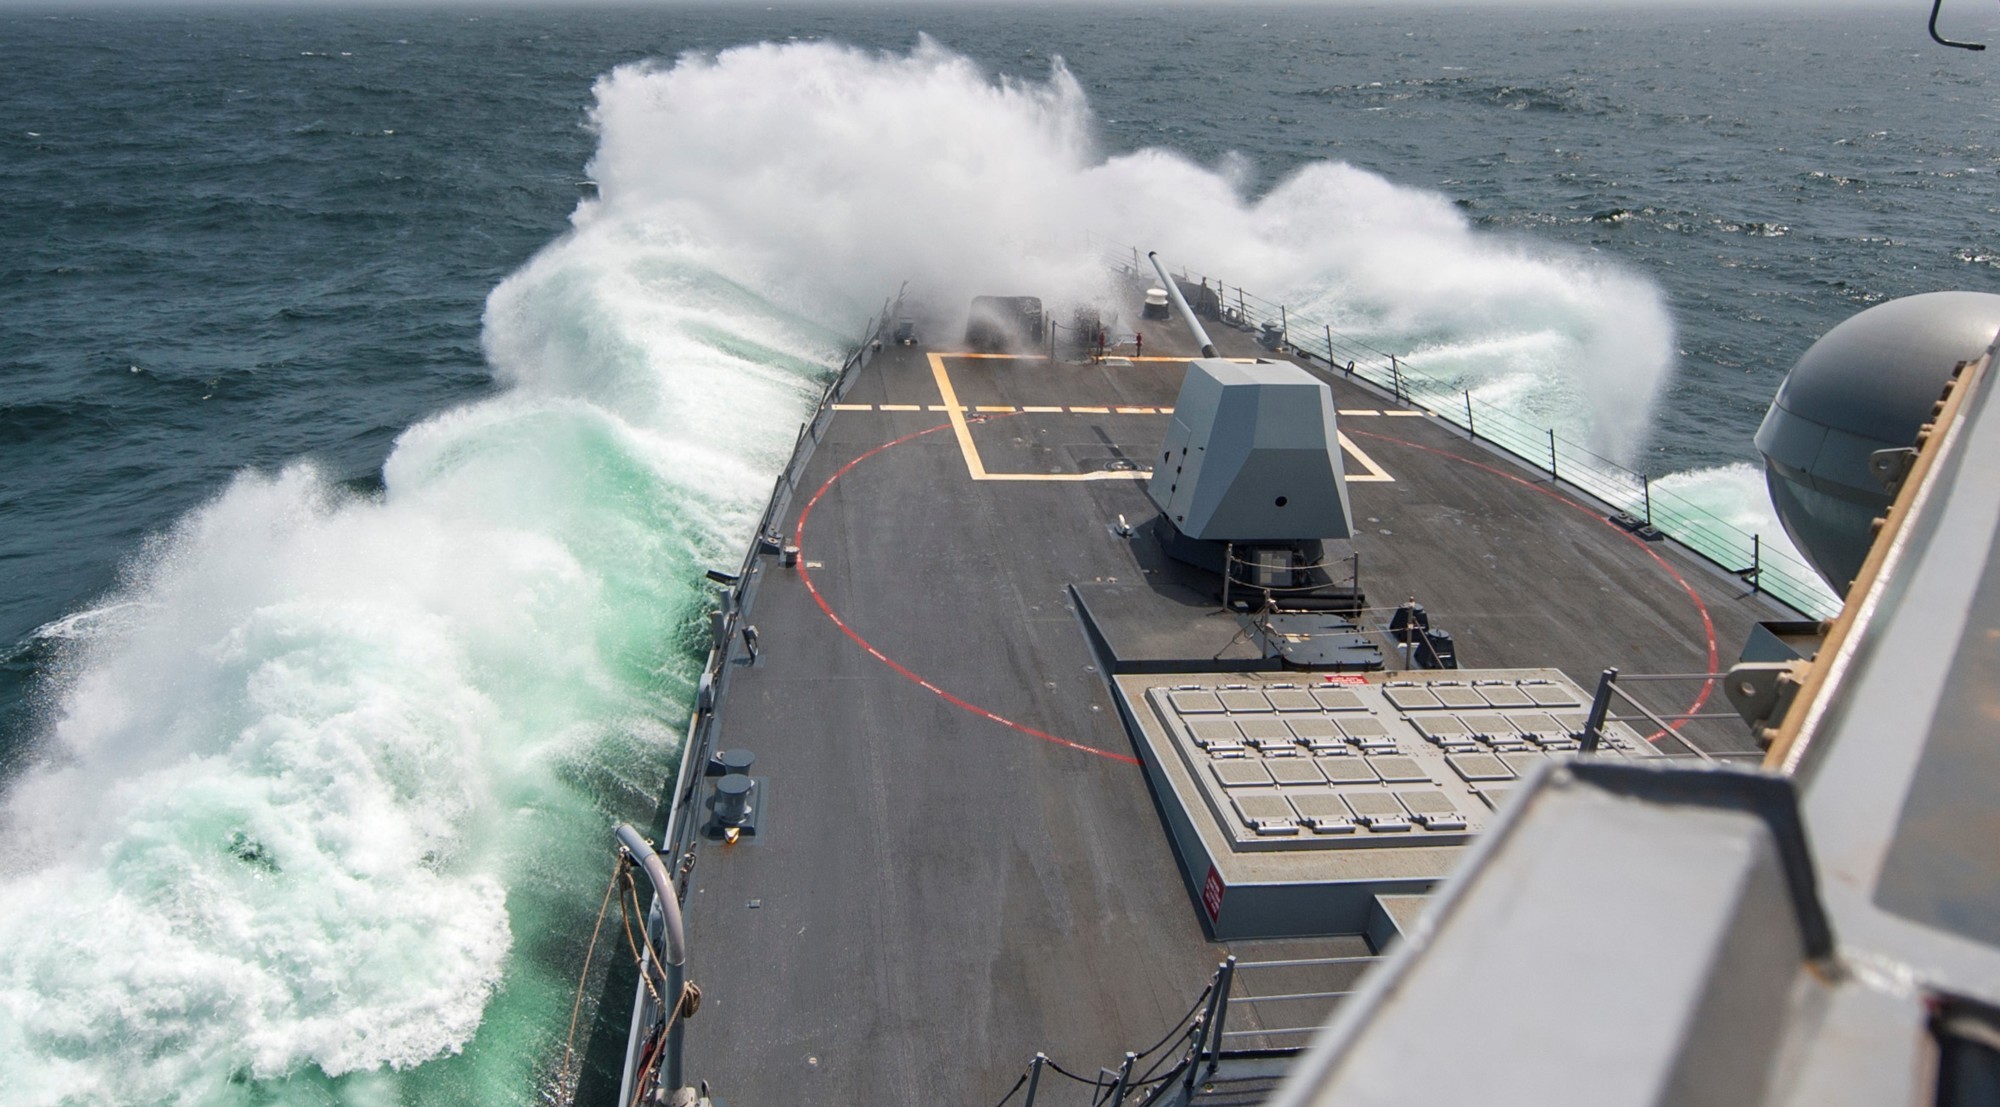 ddg-103 uss truxtun arleigh burke class guided missile destroyer aegis us navy red sea 21